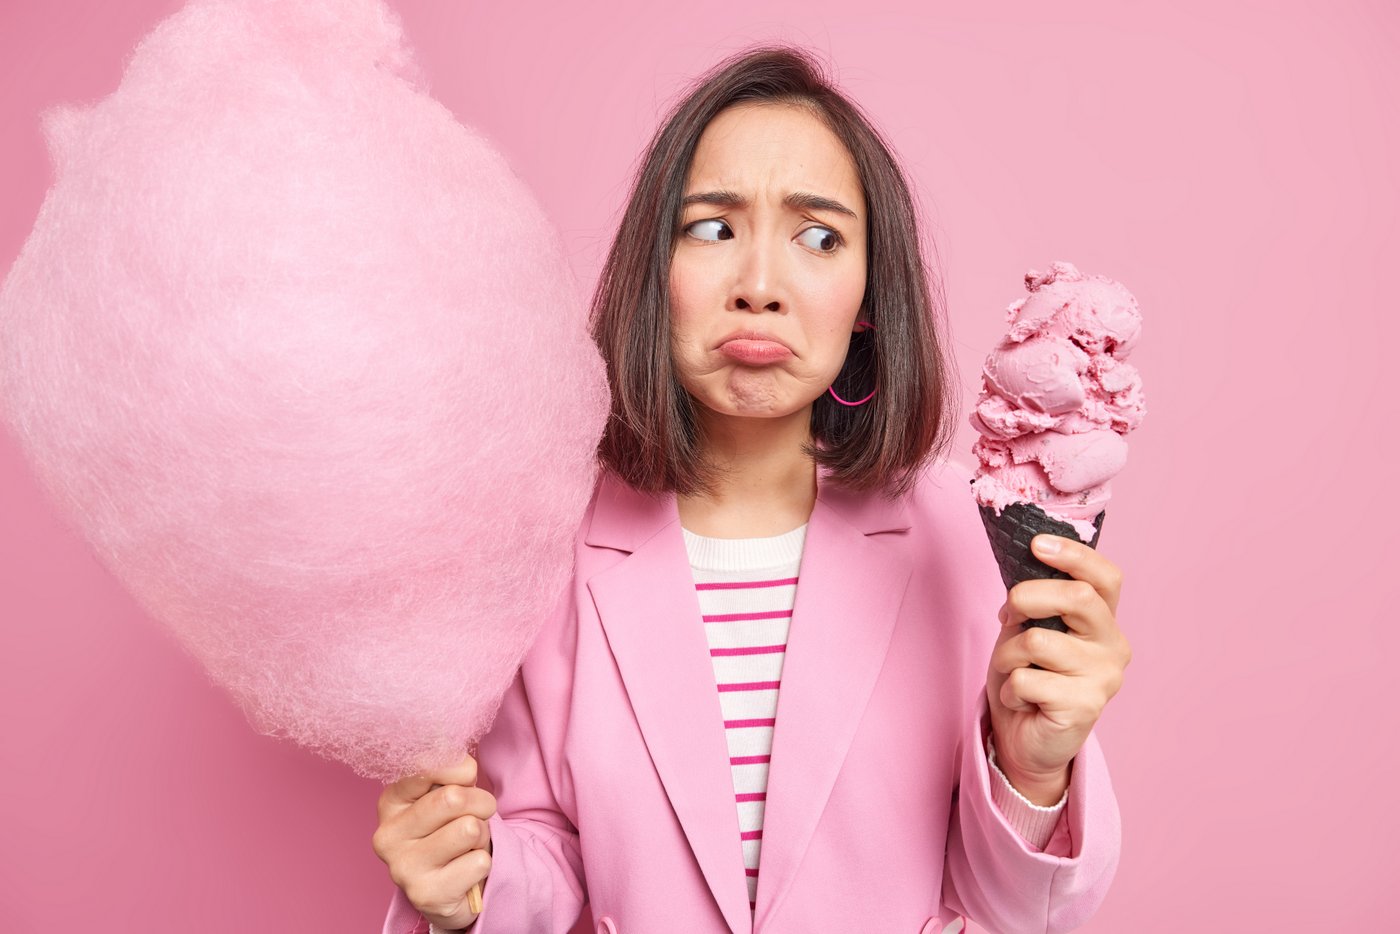 Woman eating carmine colored pink ice cream and cotton candy